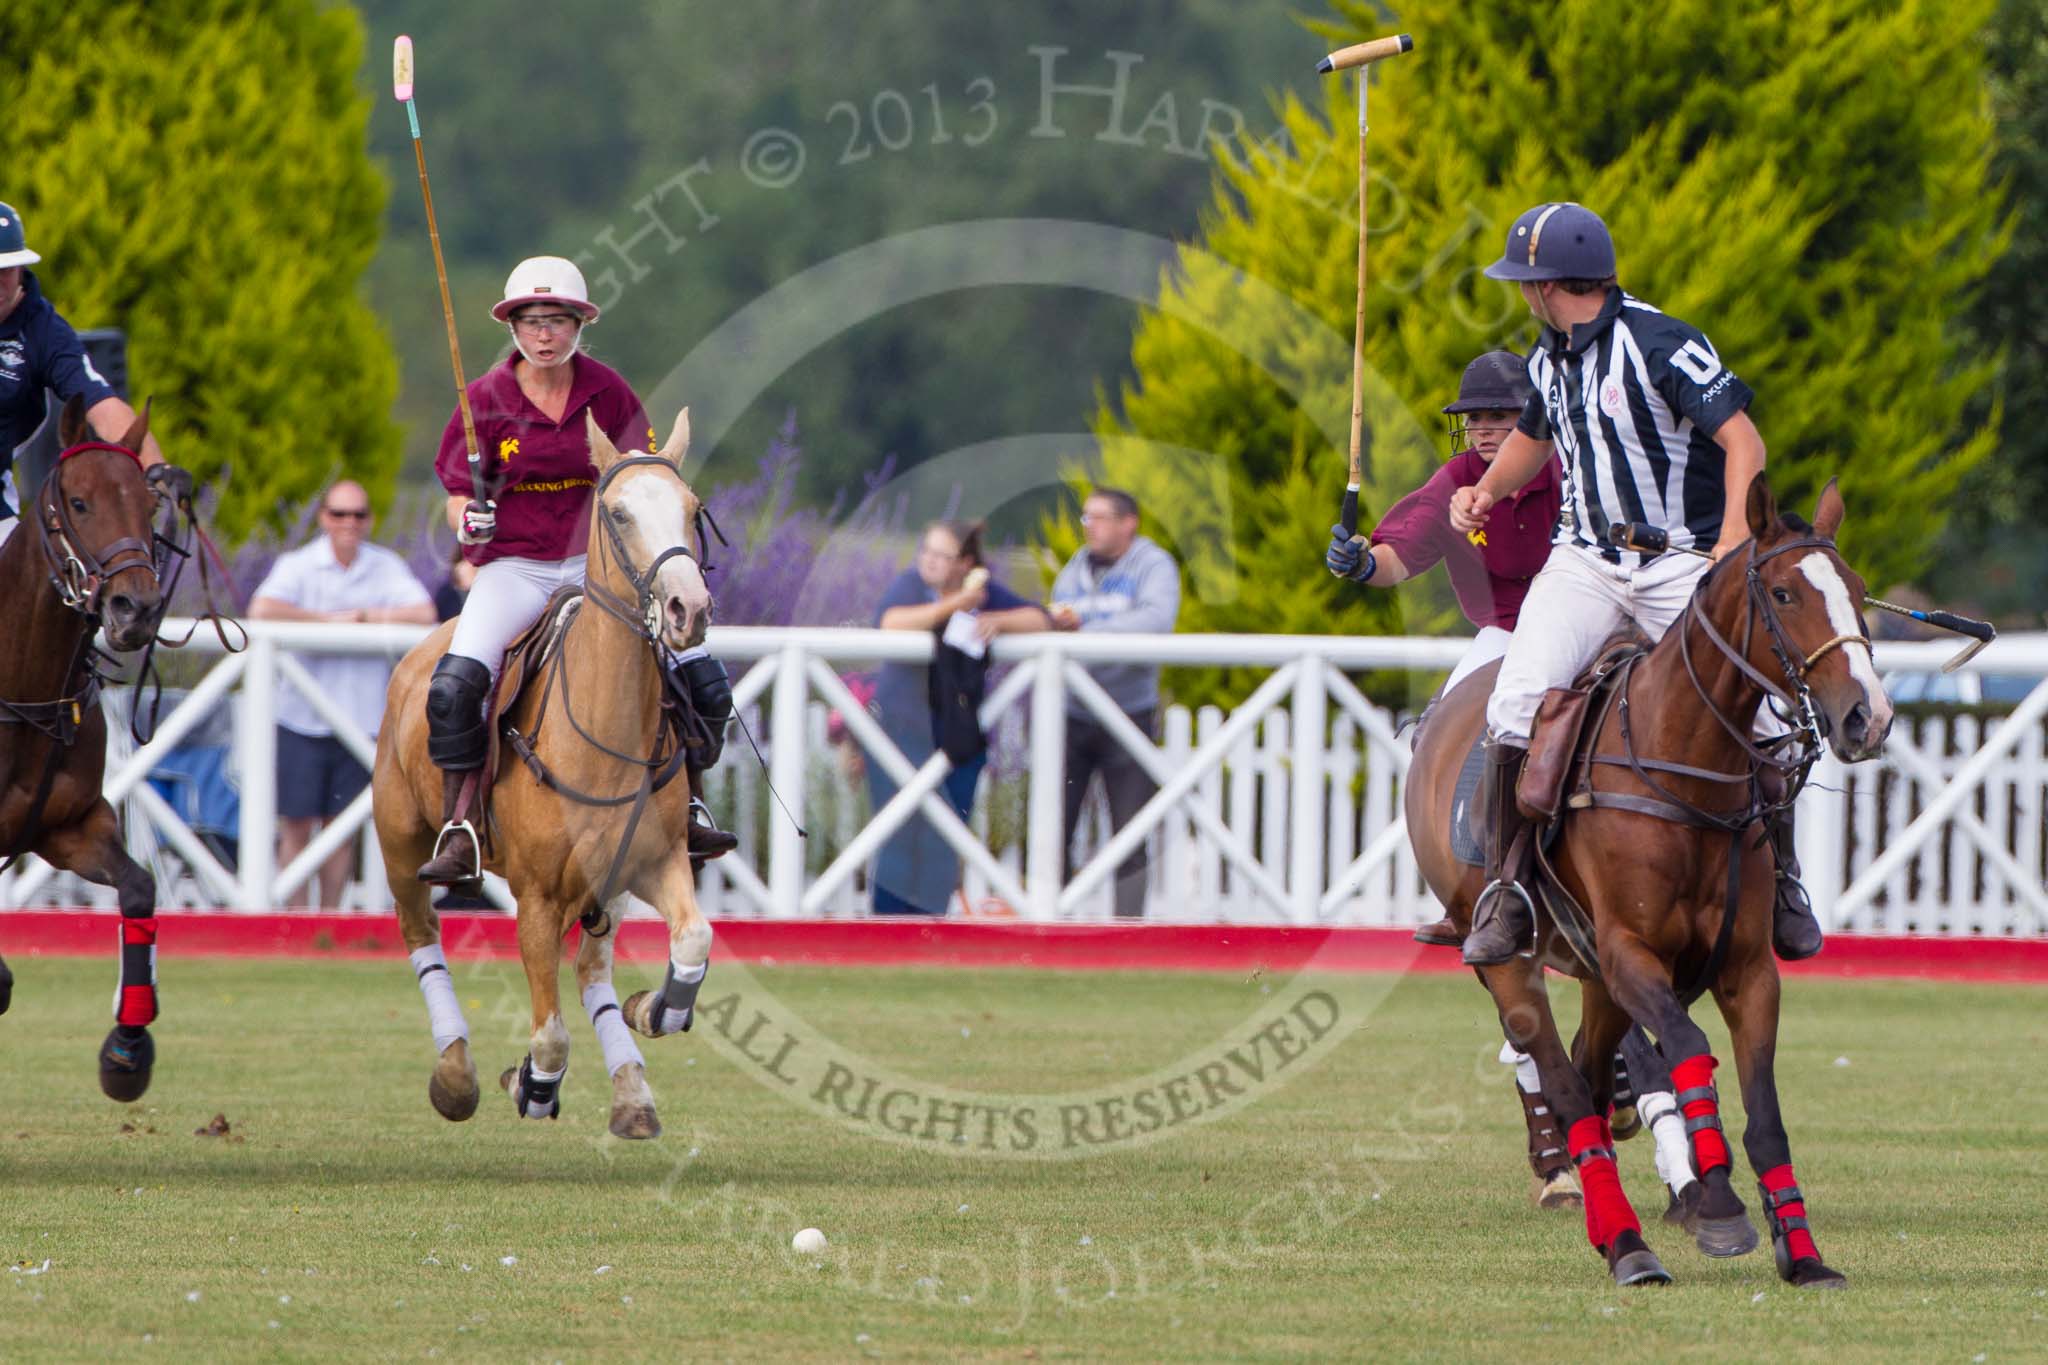 DBPC Polo in the Park 2013, Final of the Amaranther Trophy (0 Goal), Bucking Broncos vs The Inn Team.
Dallas Burston Polo Club, ,
Southam,
Warwickshire,
United Kingdom,
on 01 September 2013 at 12:25, image #199